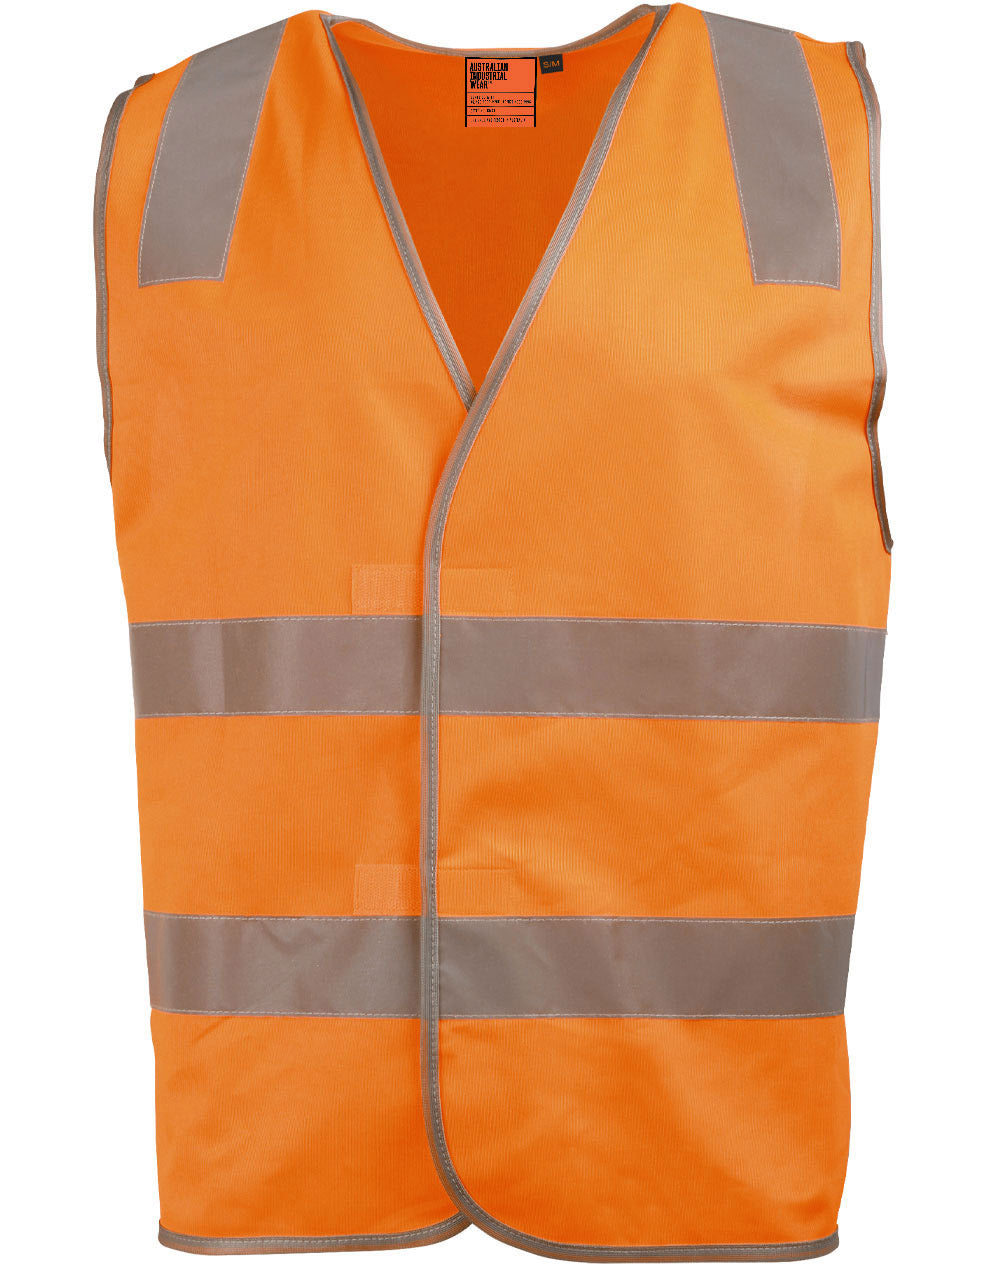 AIW SW43 Hivis Safety Vest with Shoulder Reflective Tapes